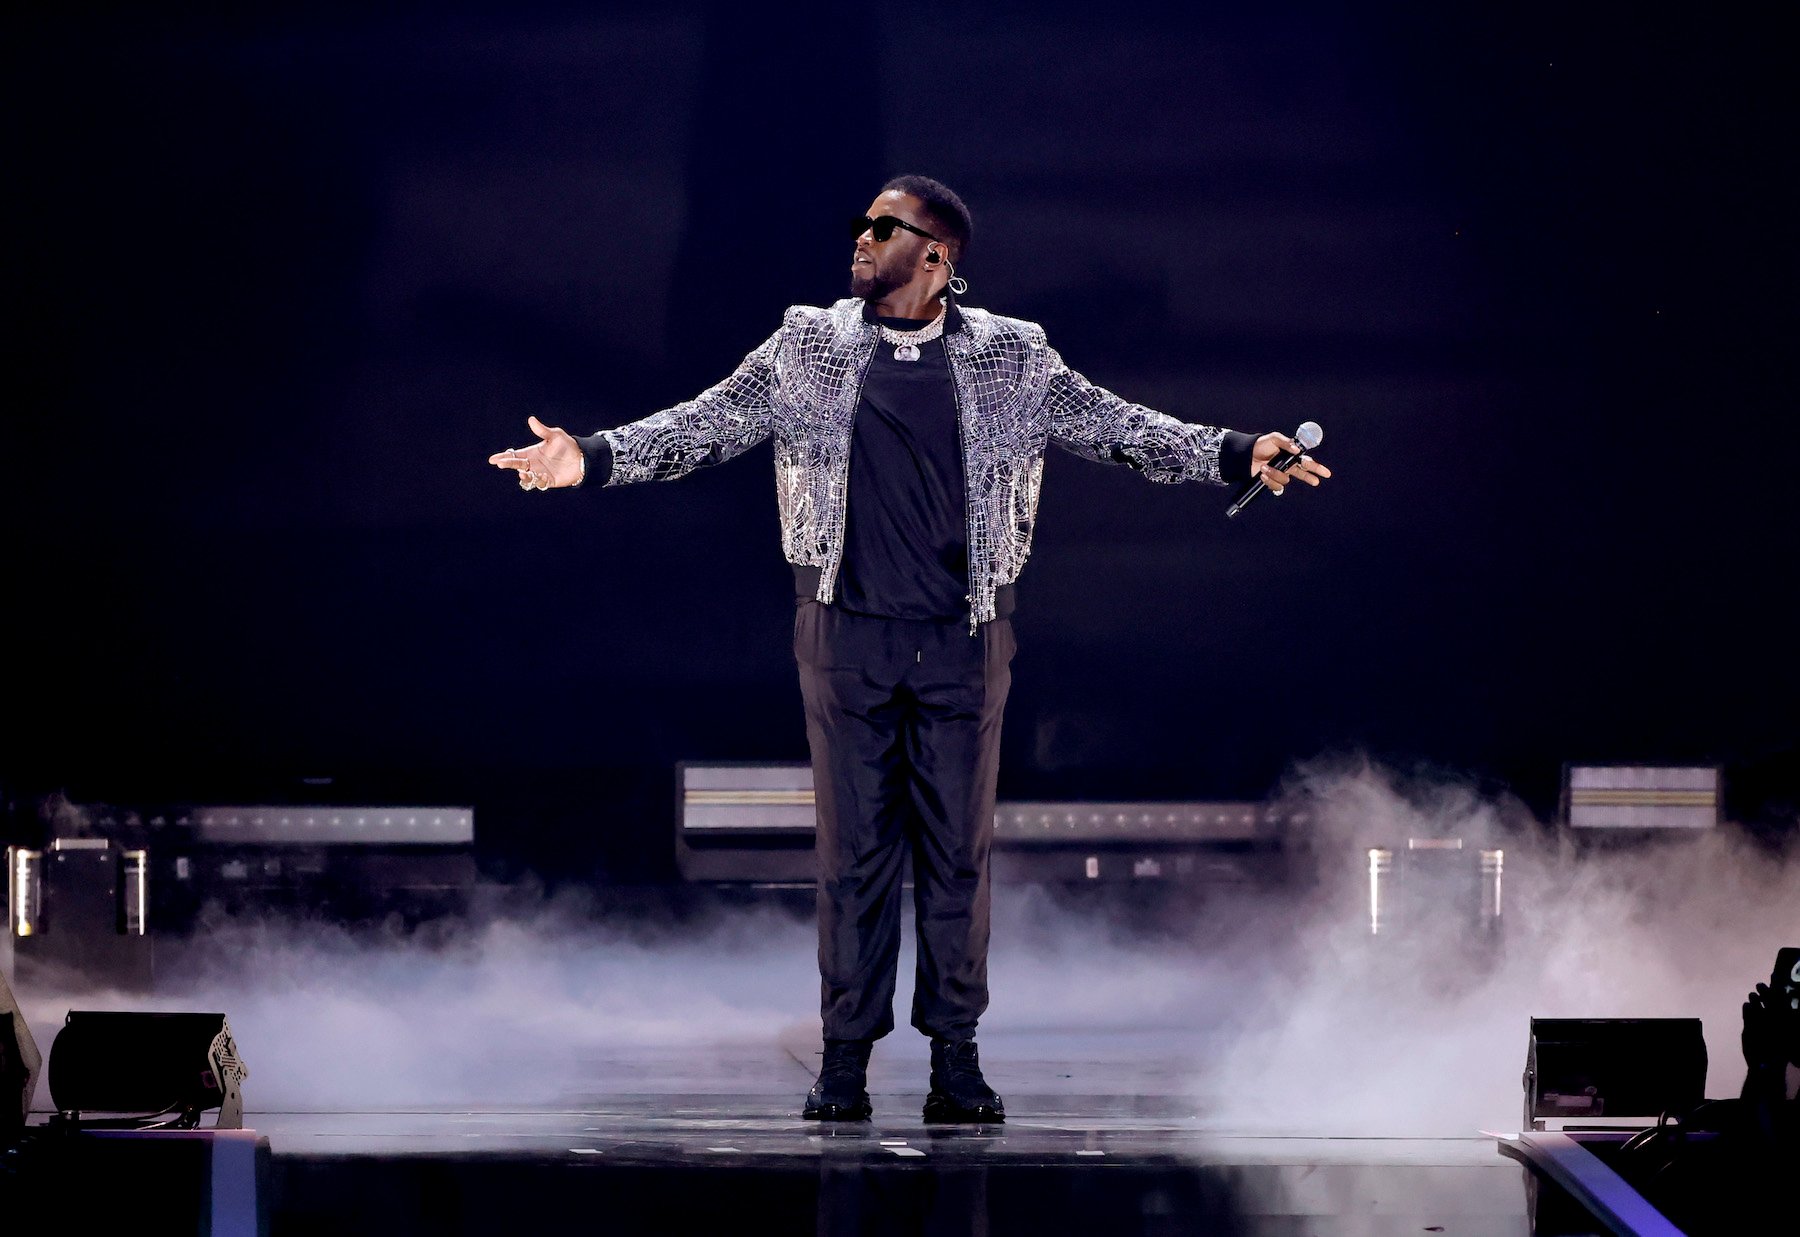 Legacy rapper and record executive Sean “Diddy" Combs on stage wearing a silver jacket and black pants